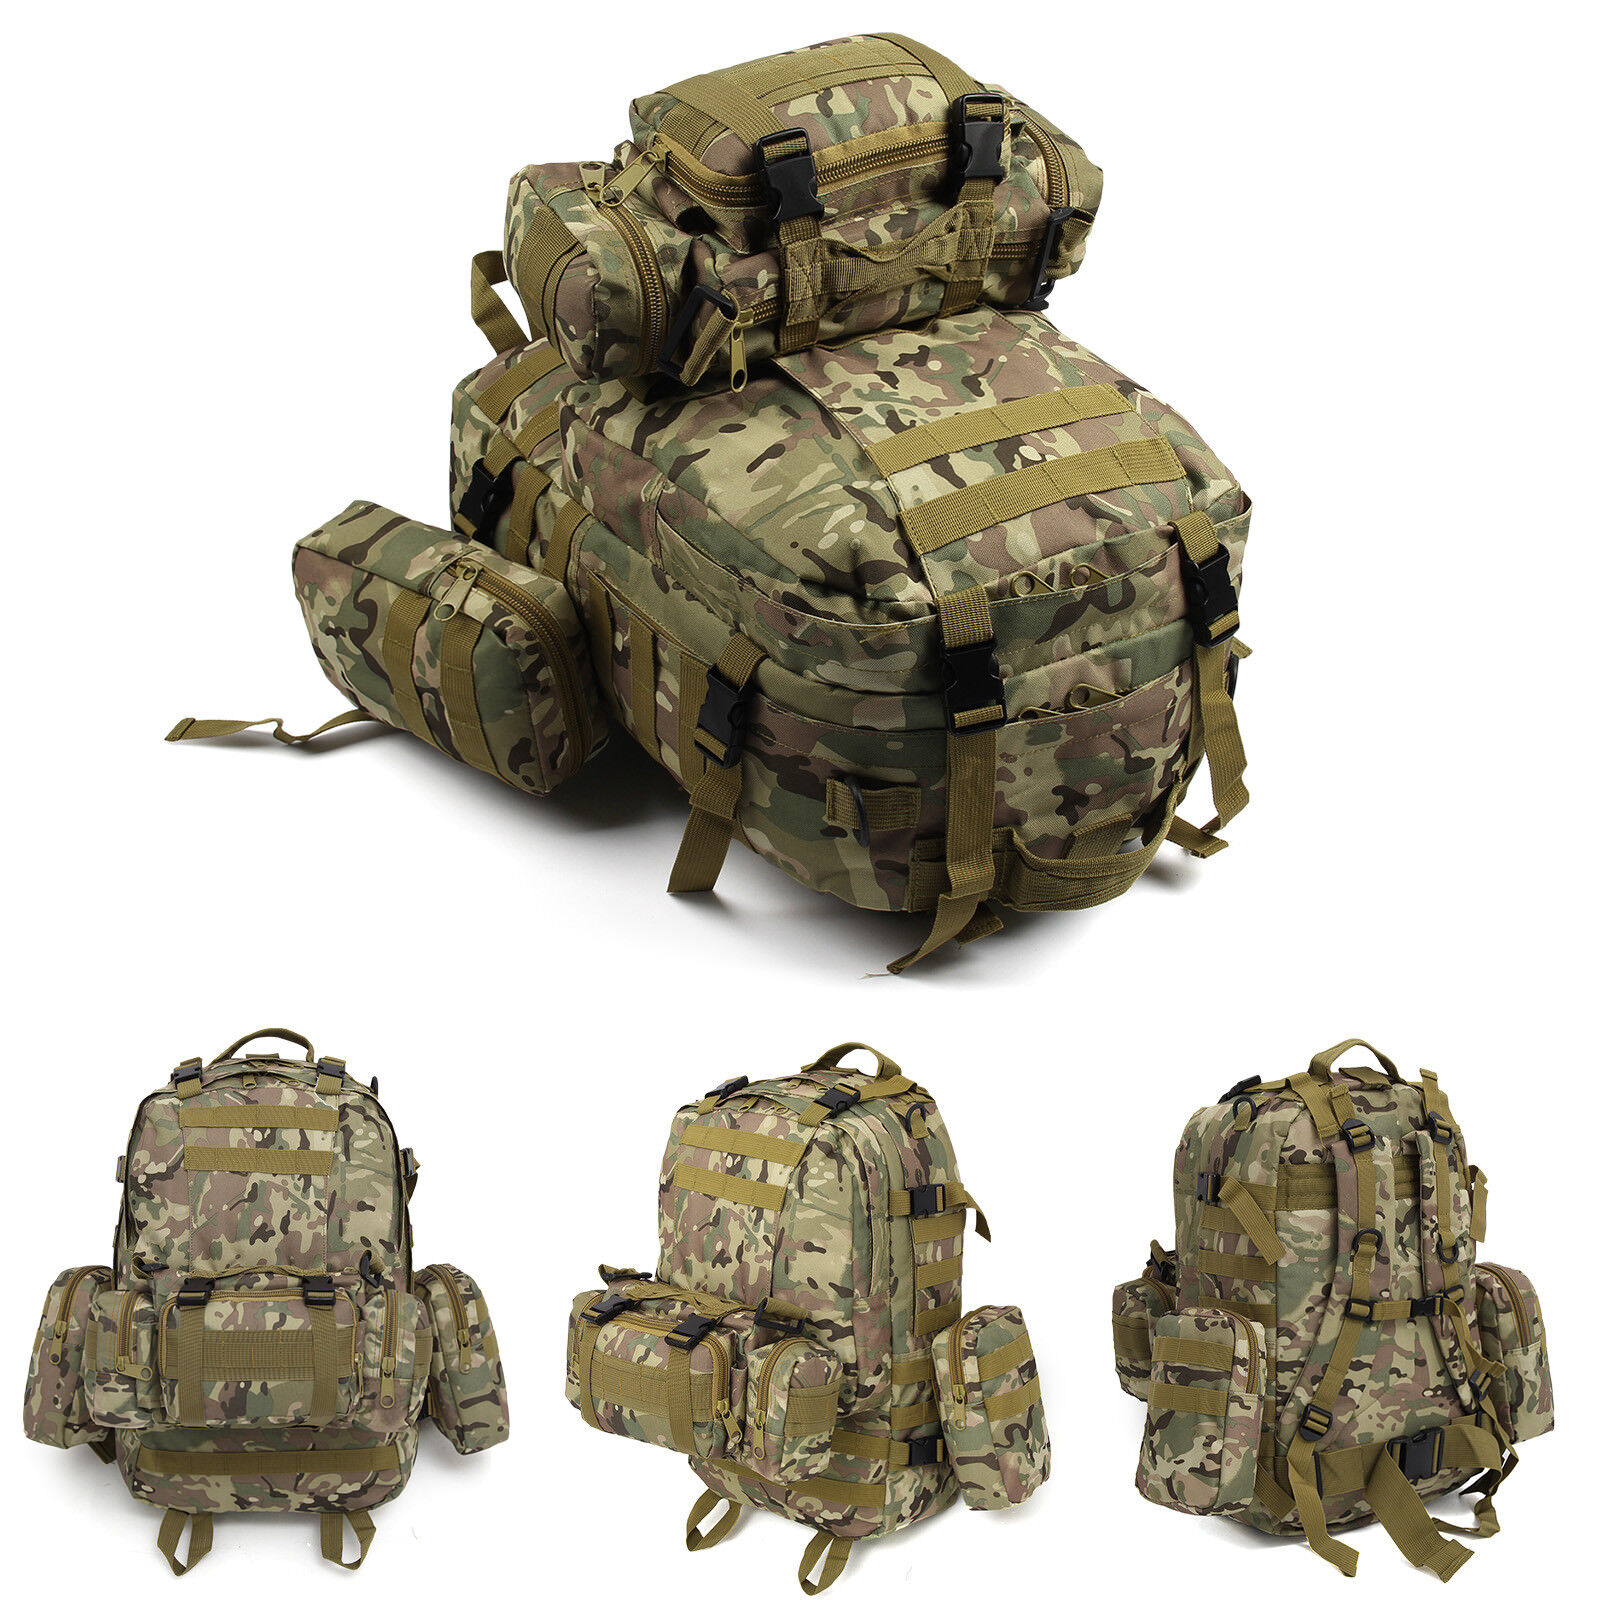 50L Camouflage Modern Military Tactical Army Rucksacks Molle Backpack Camping Hiking Bag